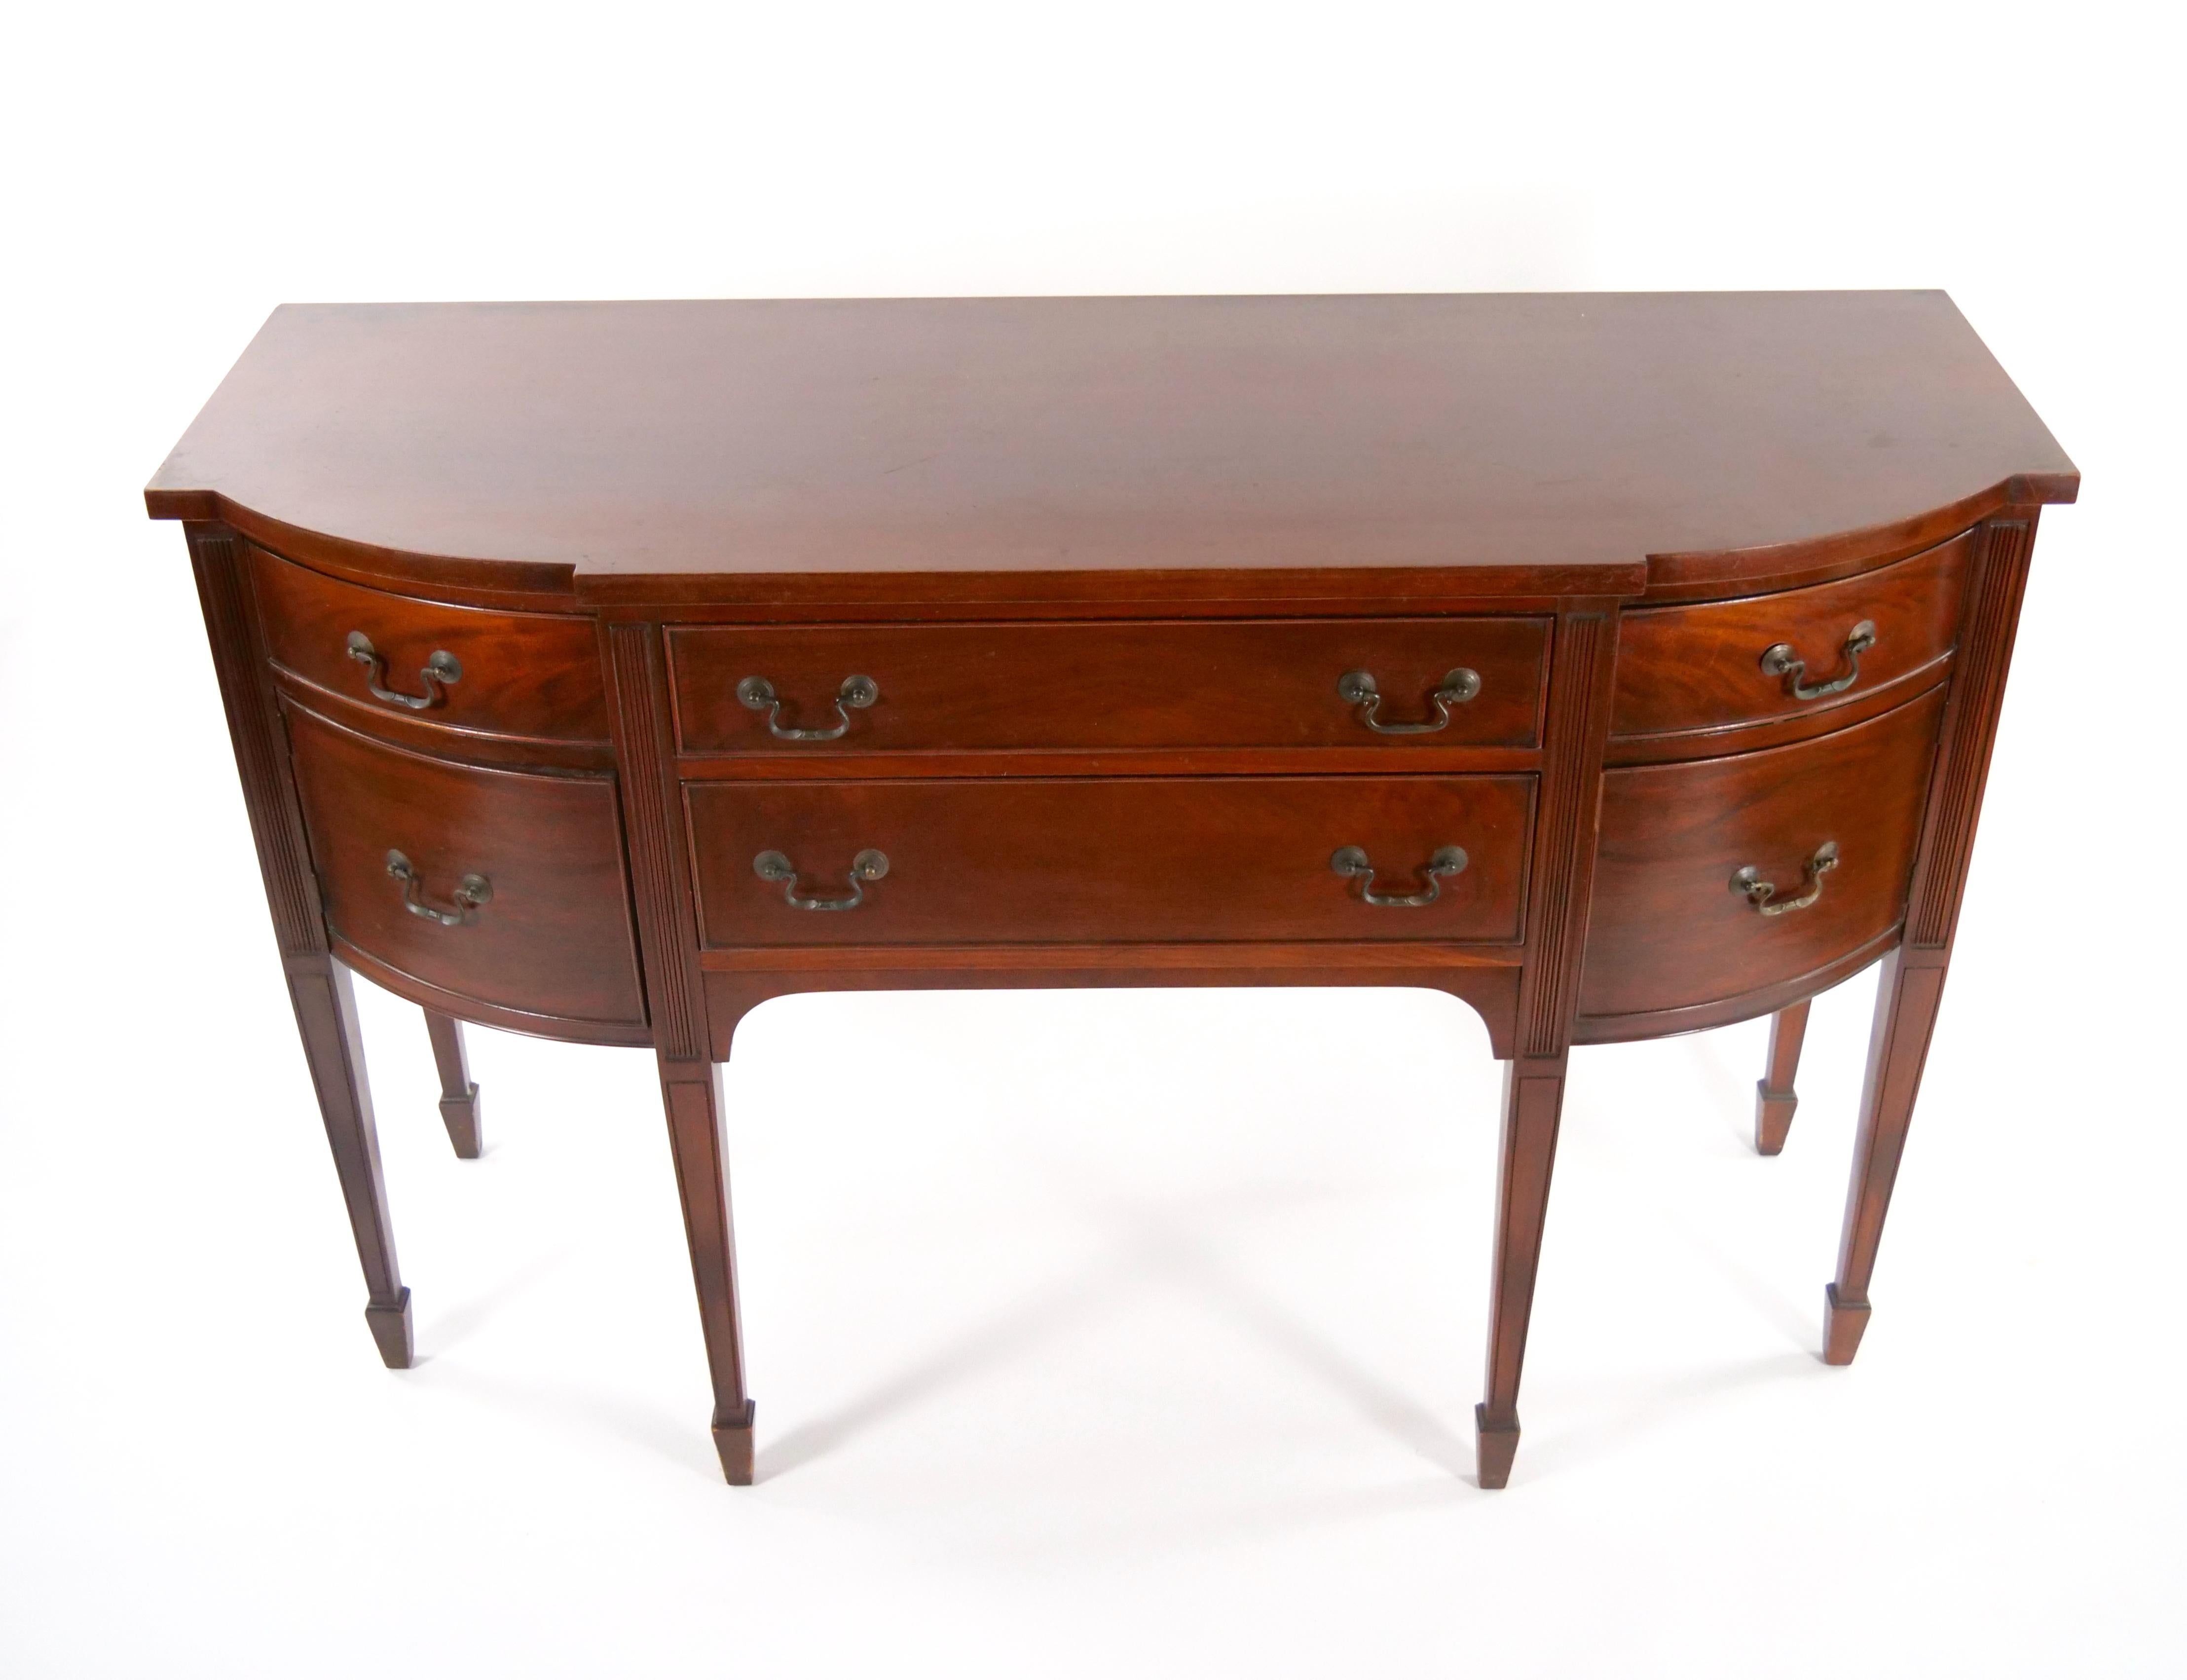 Immerse yourself in the rich history and enduring beauty of the Late 19th Century with our distinguished Mahogany Wood Bow-Front Buffet/Server. This antique masterpiece showcases a bow-front design, featuring two center drawers elegantly flanked by